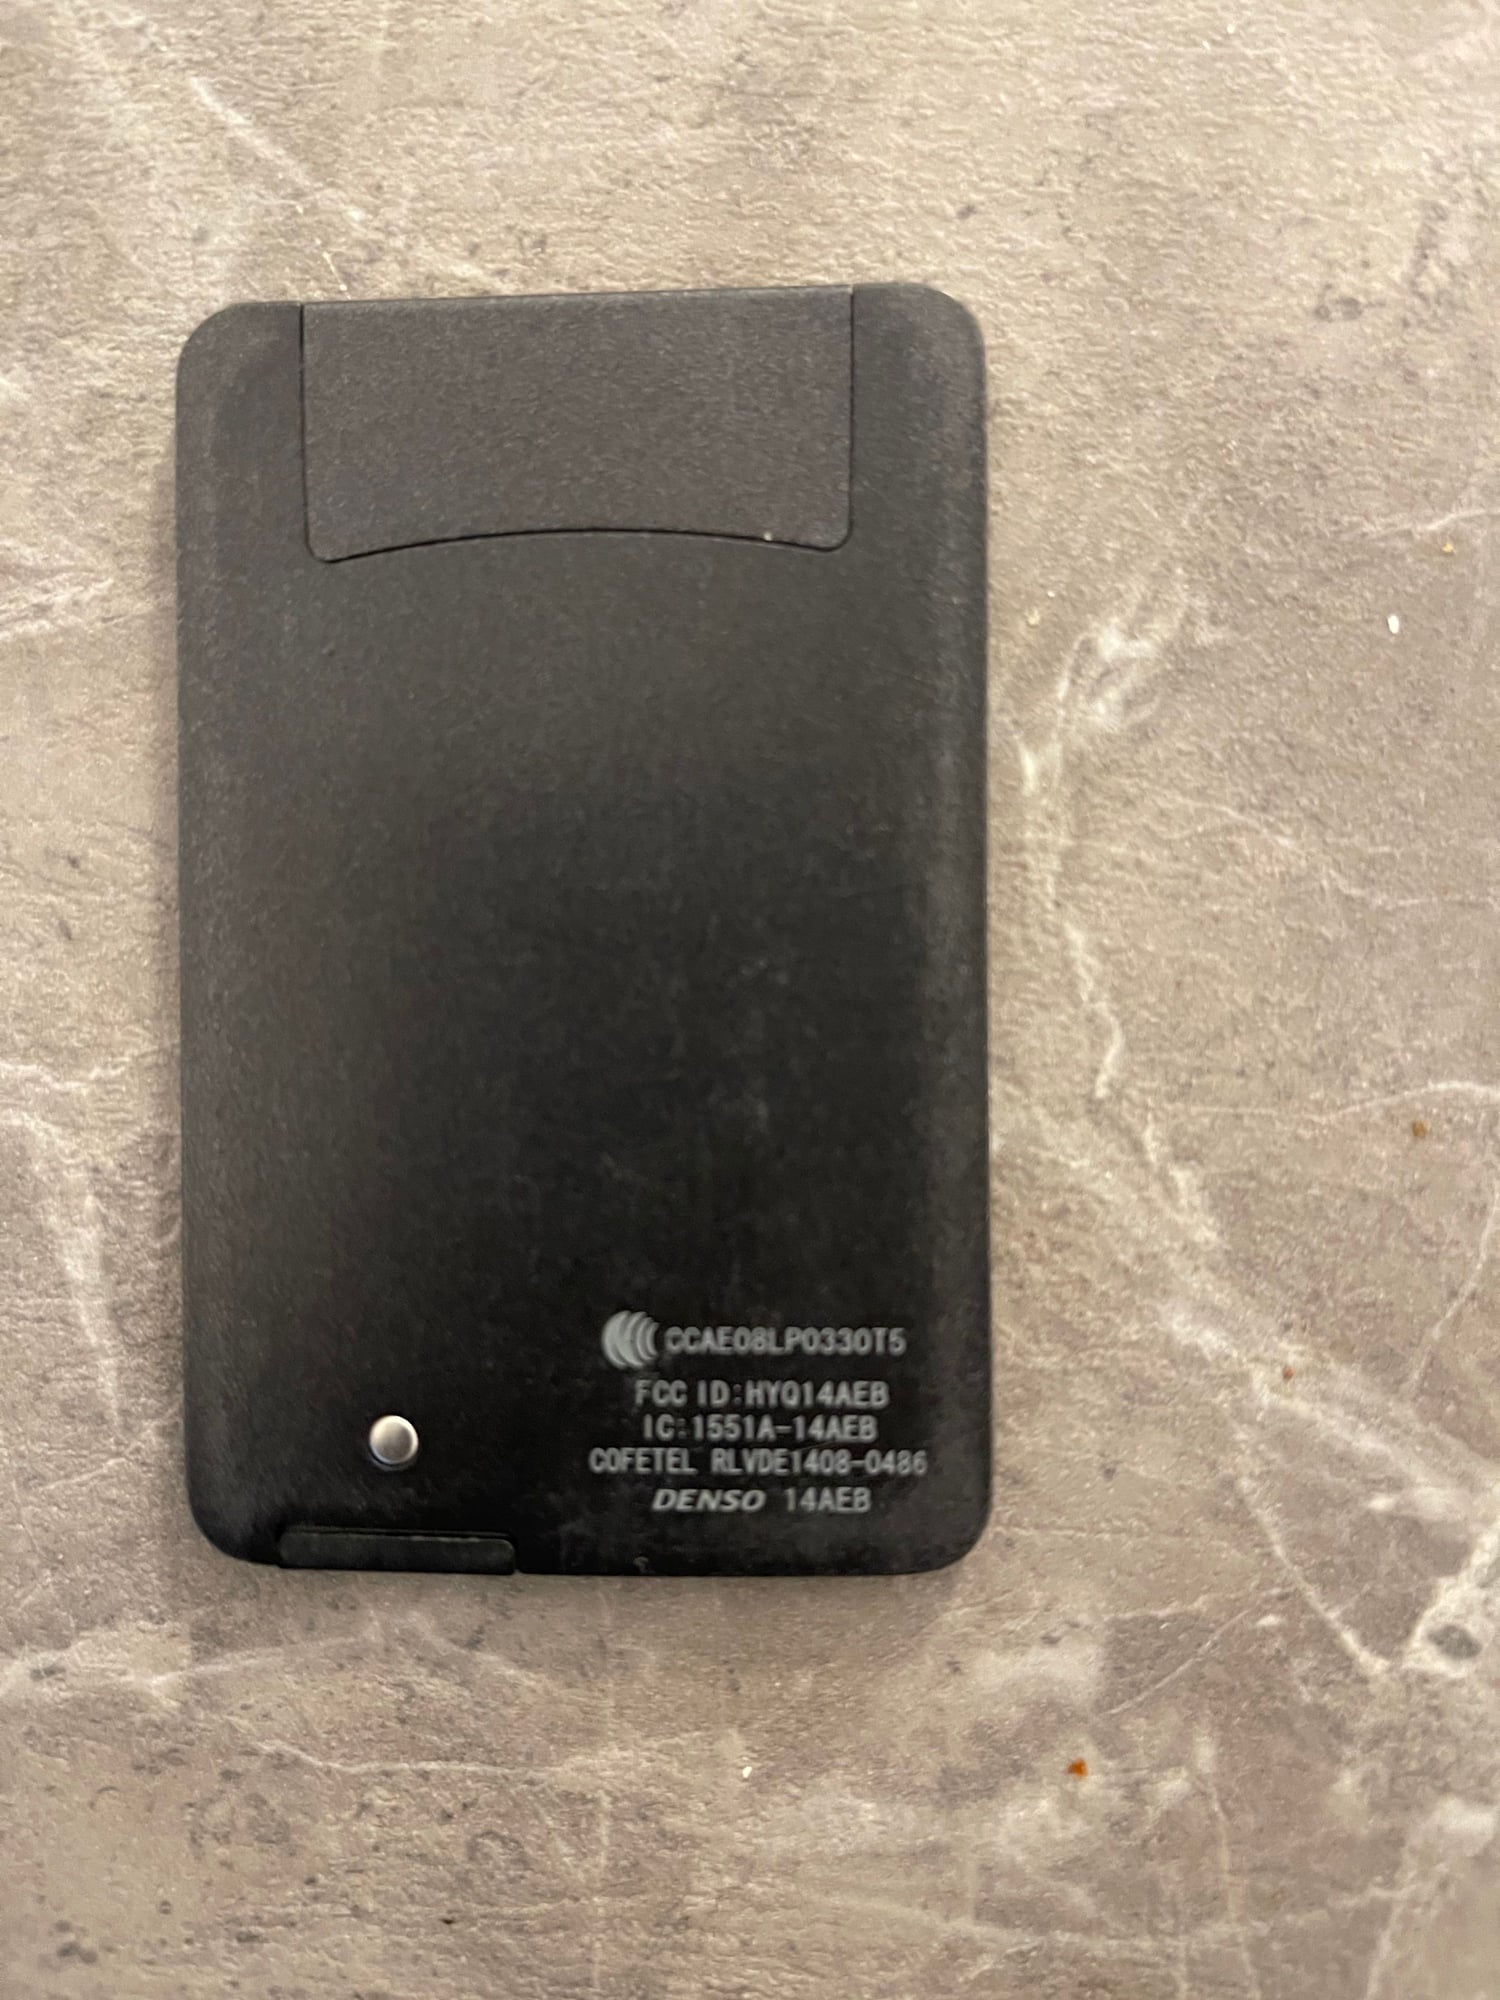 Accessories - Lexus smart credit card key - Used - 2010 to 2014 Lexus RX350 - Montreal, QC H4A, Canada